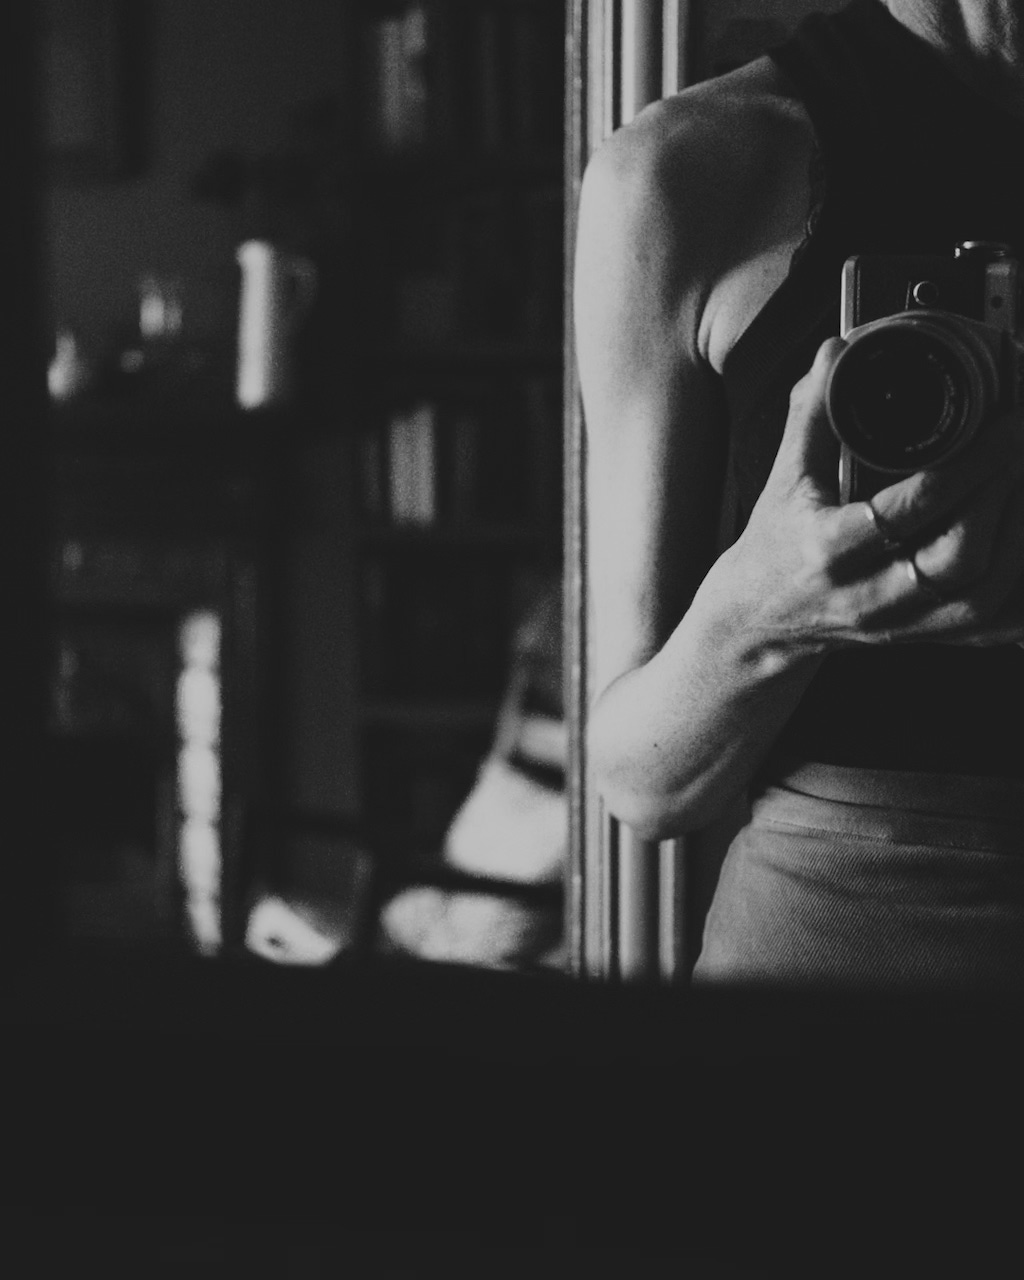 A woman is partly seen taking a photograph into a mirror, with a room visible in the background (in black and white)